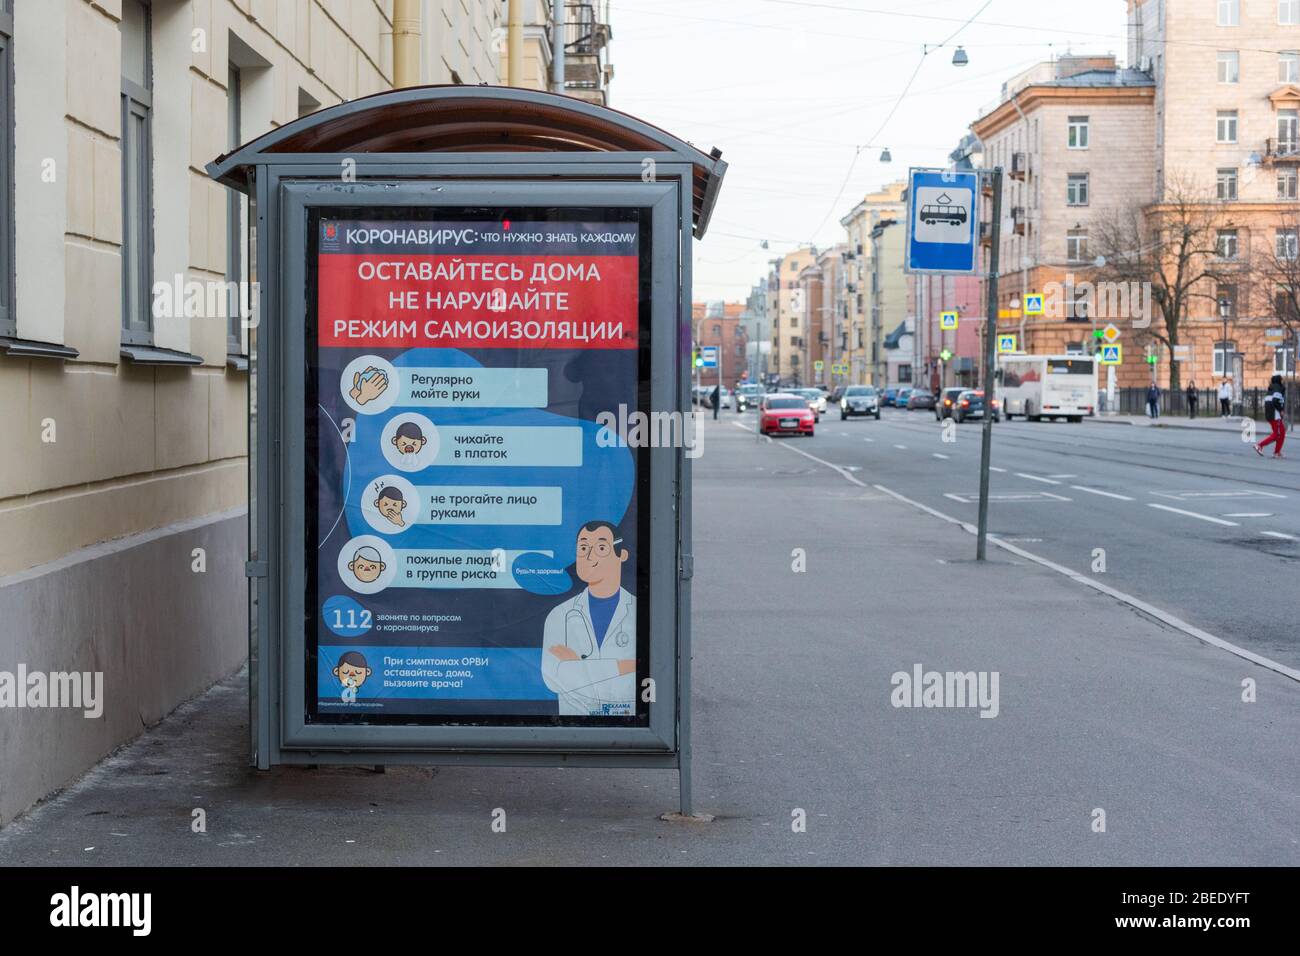 St Petersburg, Russia - April 8, 2020: poster with a header 'Coronavirus, what everybody must know' in Russian at a bus stop. Stock Photo